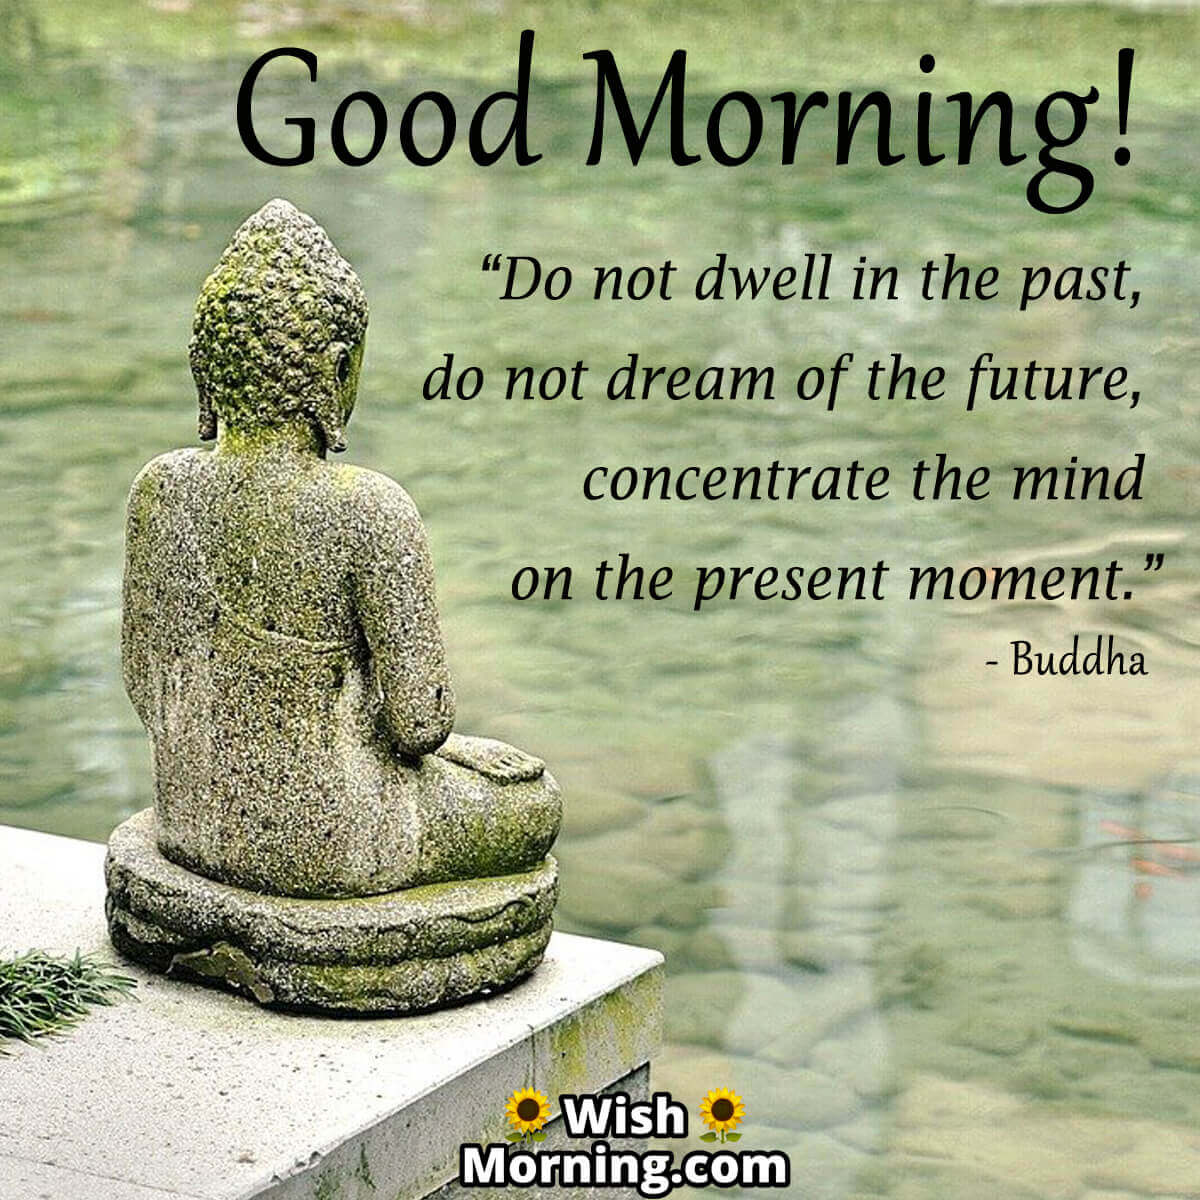 Morning Buddha Messages